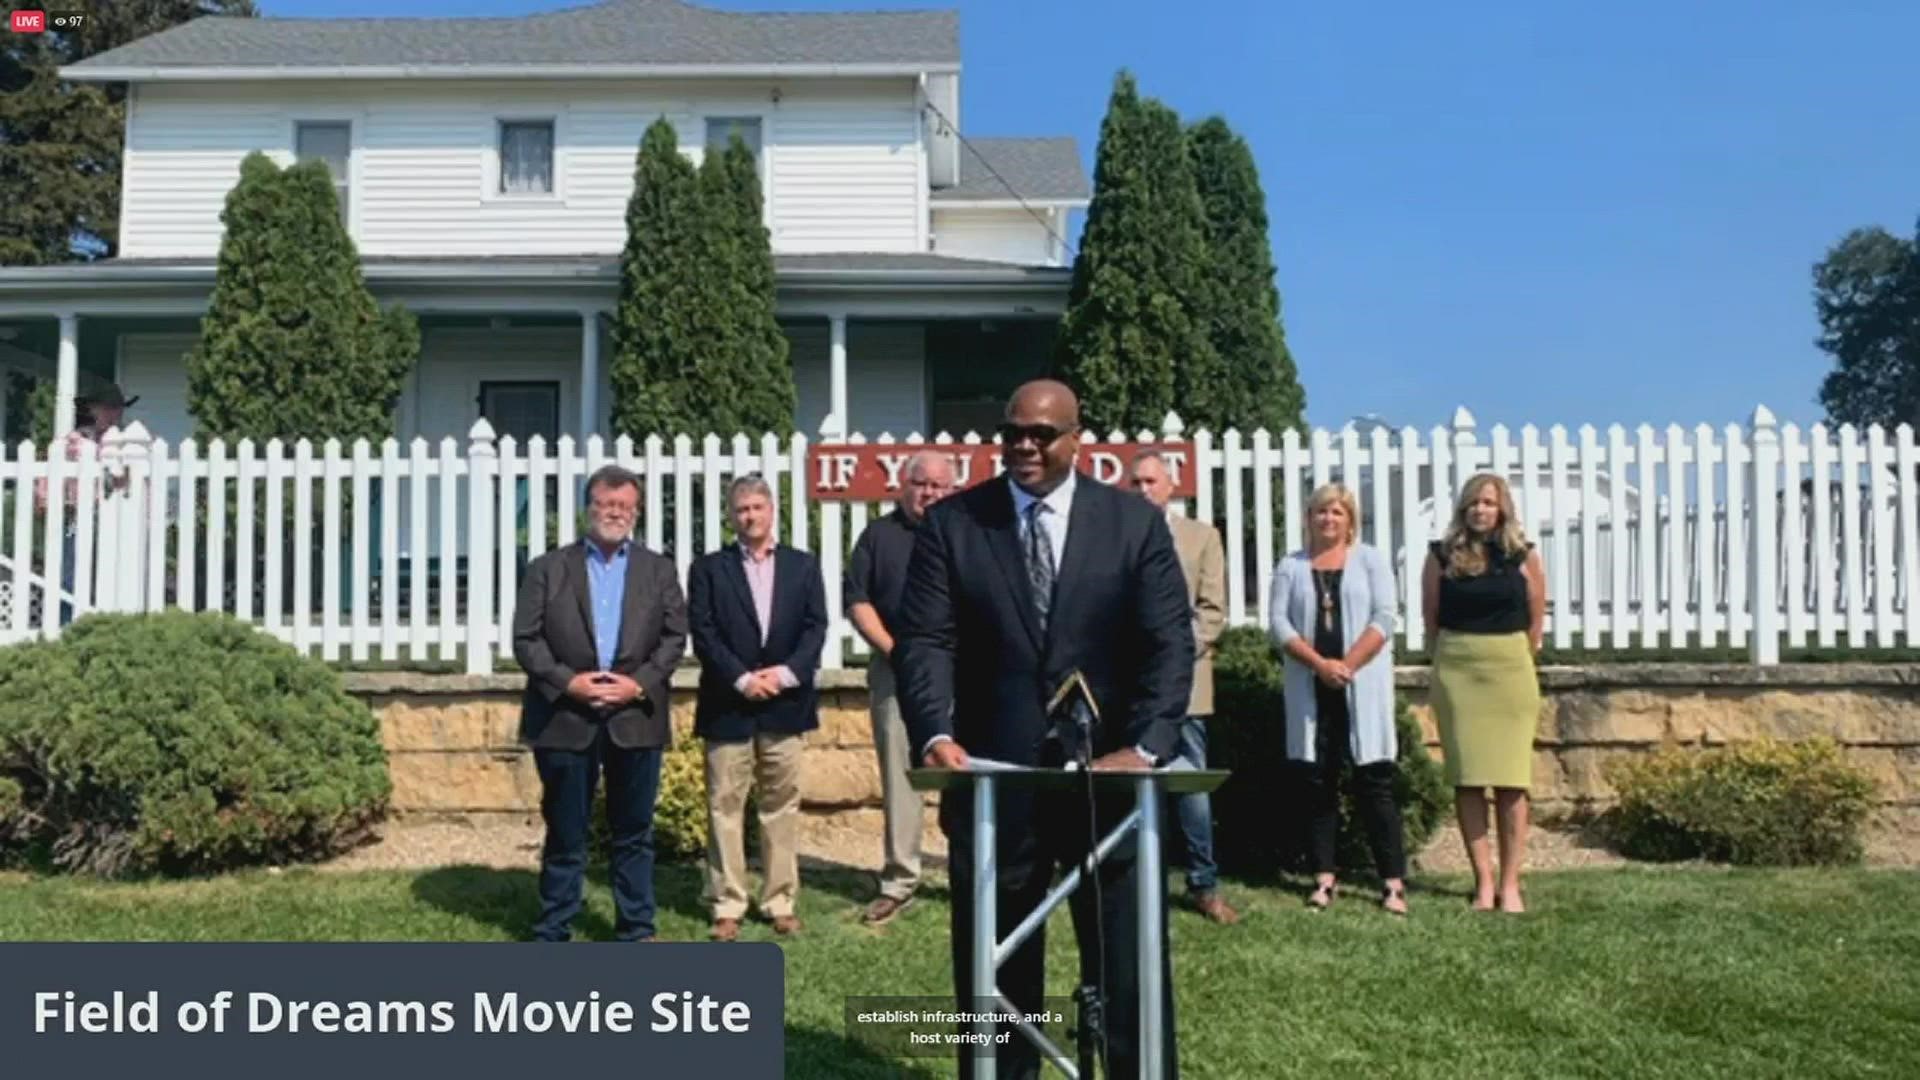 The new stakeholders promised to honor the previous owner's legacy in their future developments and uses of the movie site.